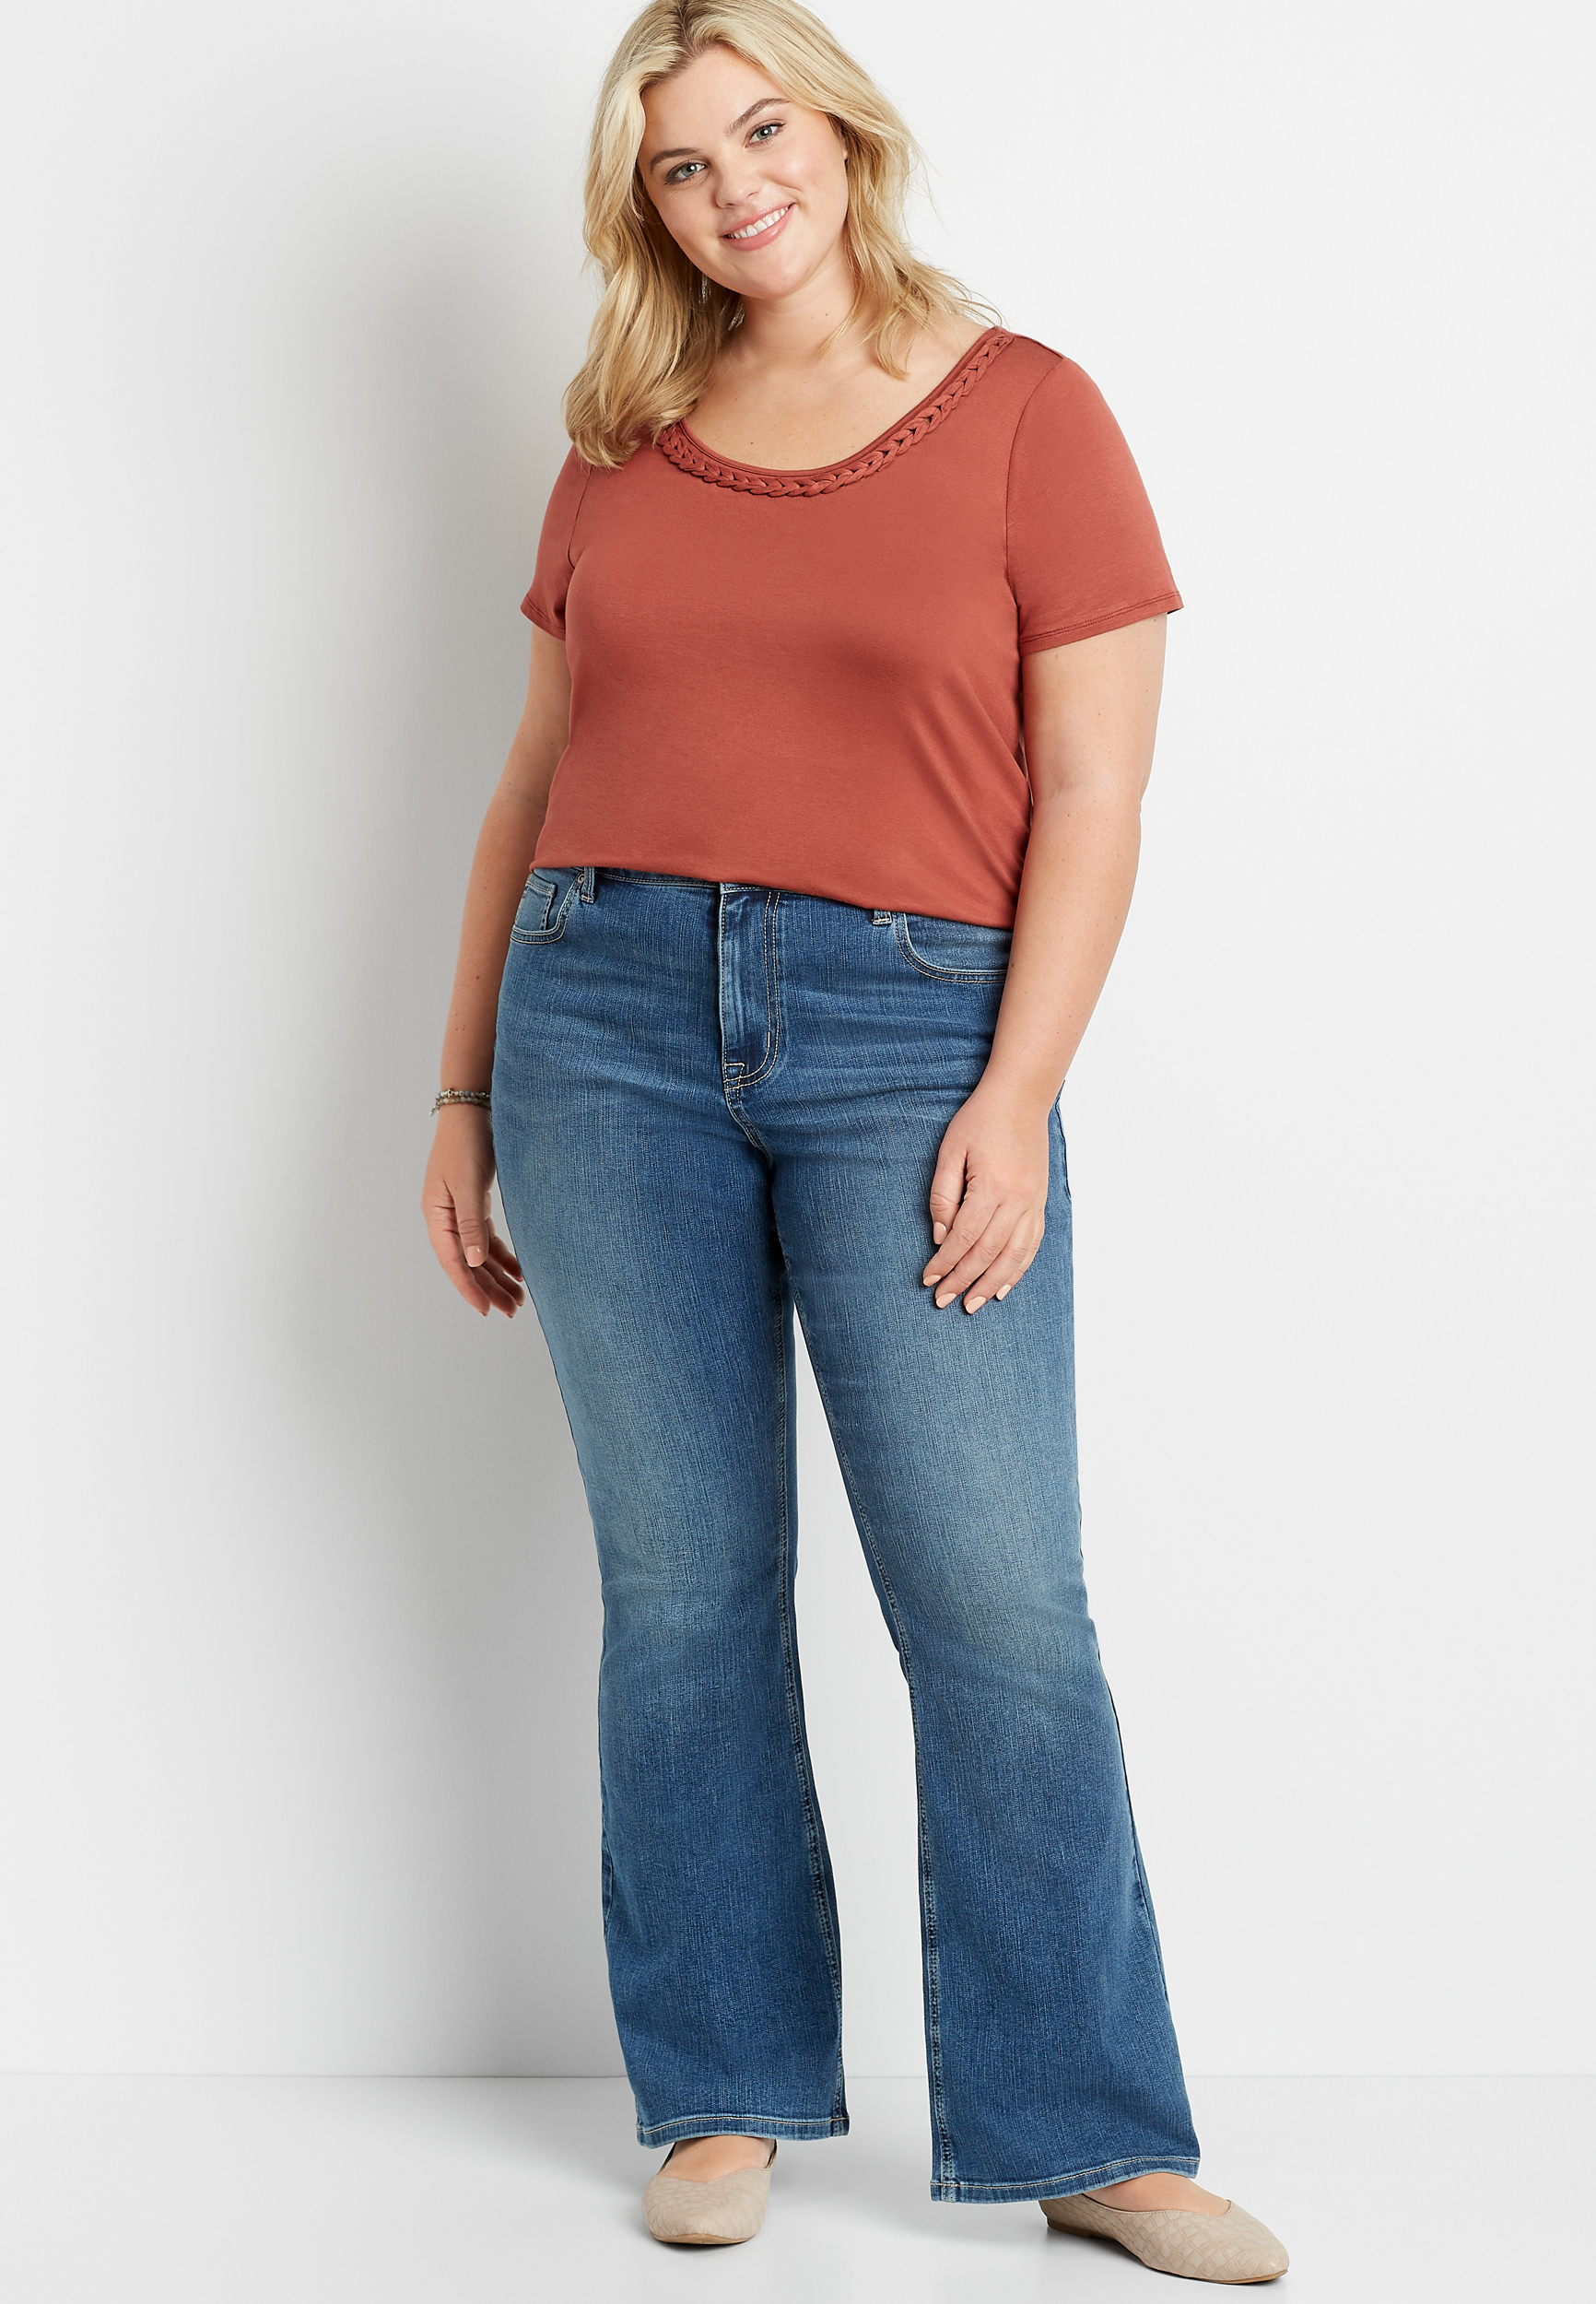 maurices low rise jeans